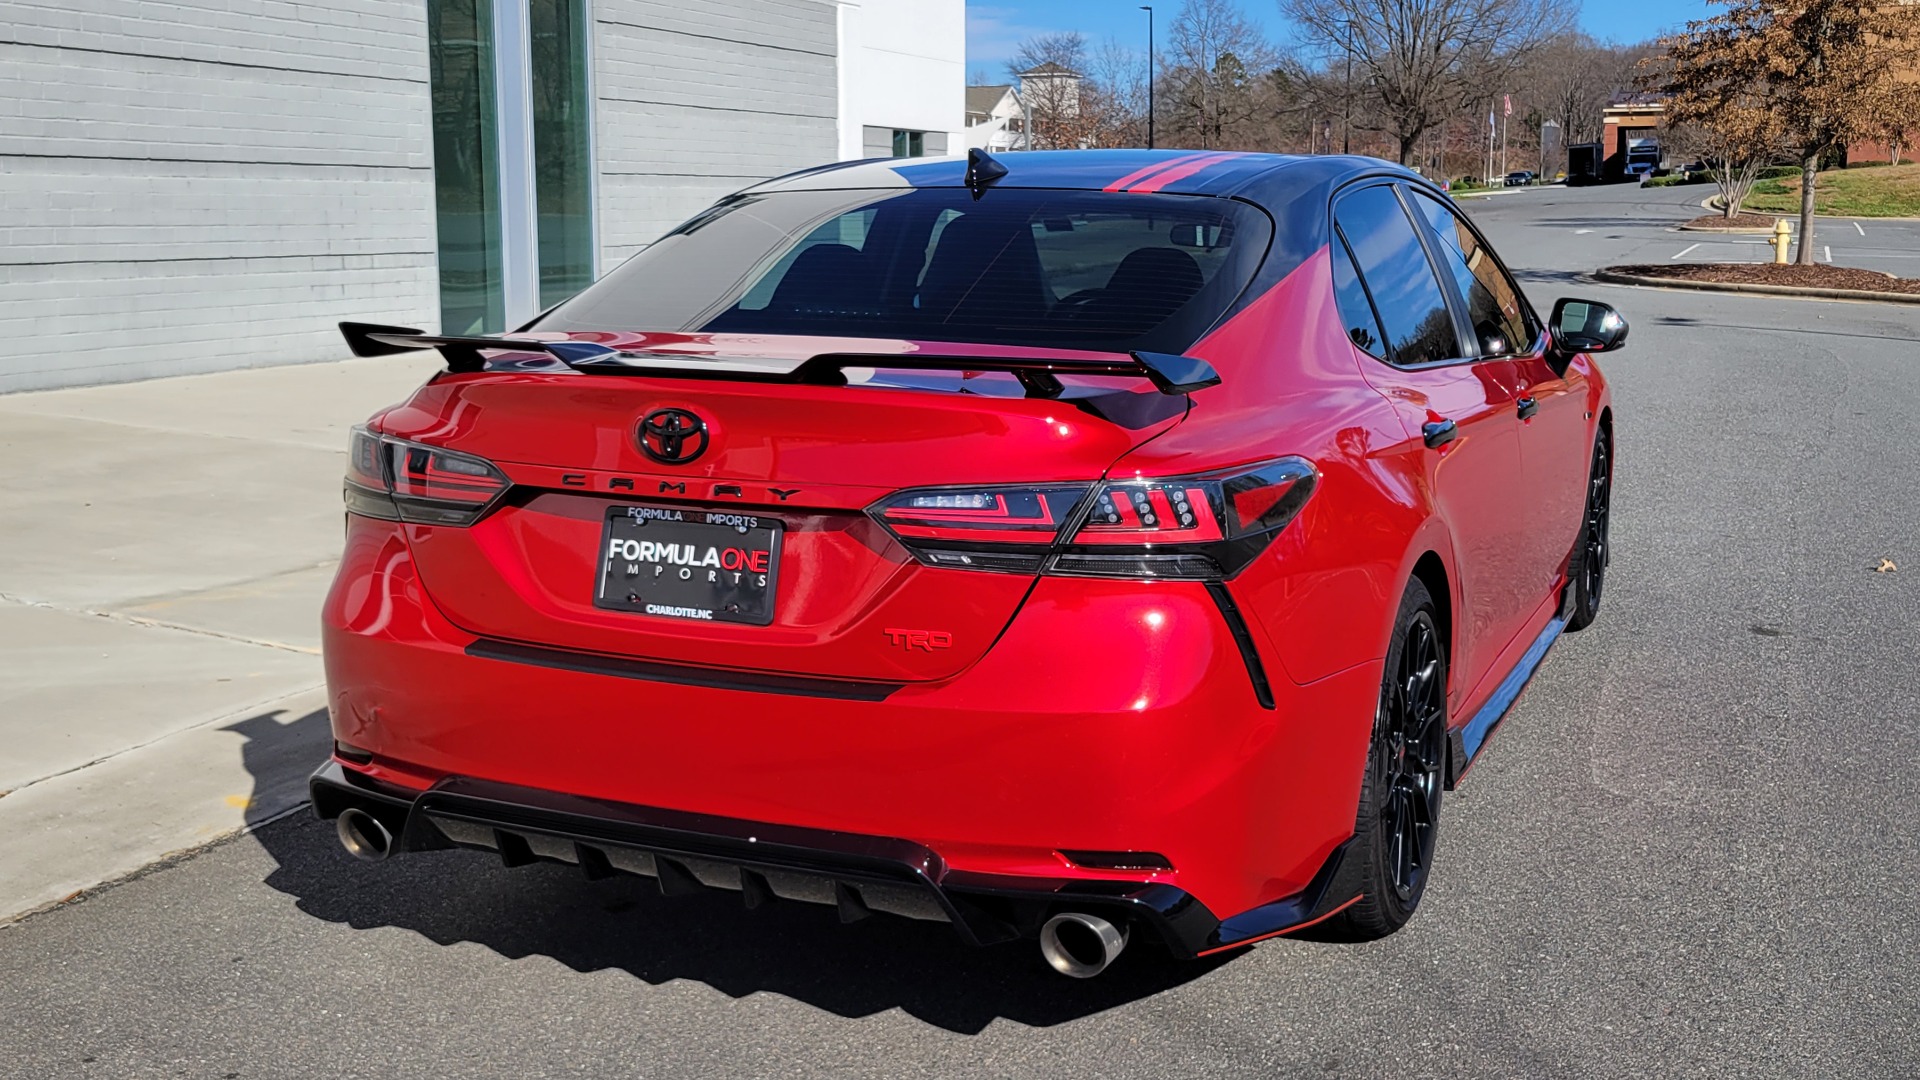 Used 2020 Toyota CAMRY TRD 3.5L V6 SEDAN / 8-SPEED AUTO / CLOTH SEATS / REARVIEW for sale $35,995 at Formula Imports in Charlotte NC 28227 7